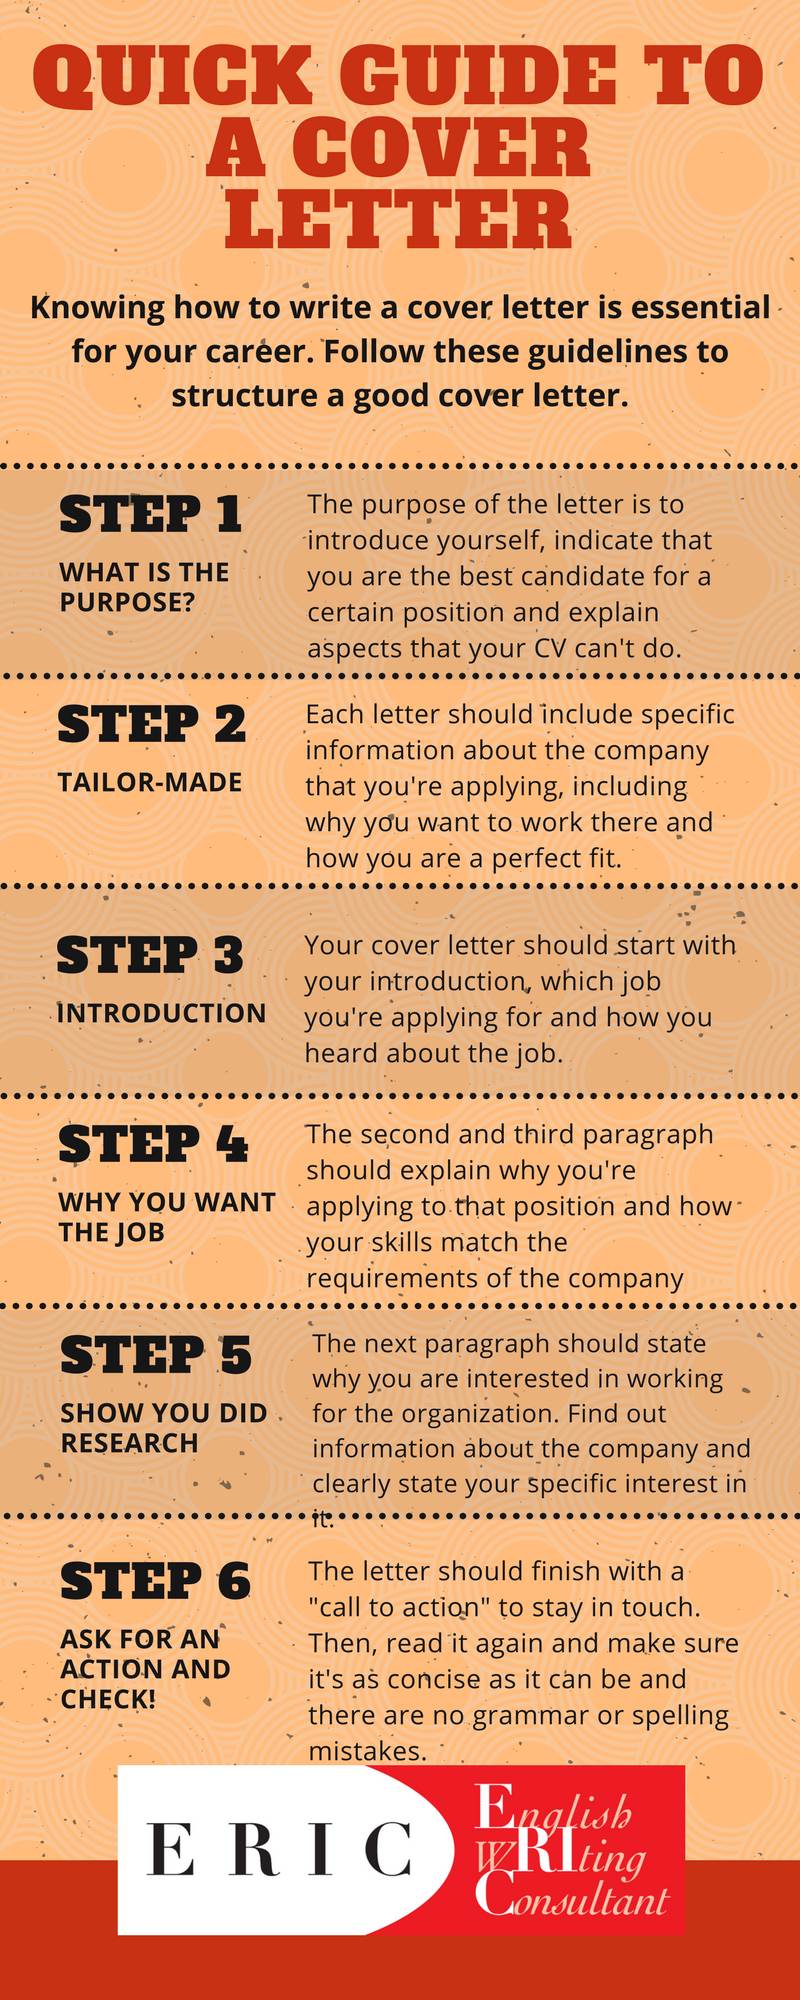 QUICK GUIDE TO A COVER LETTER